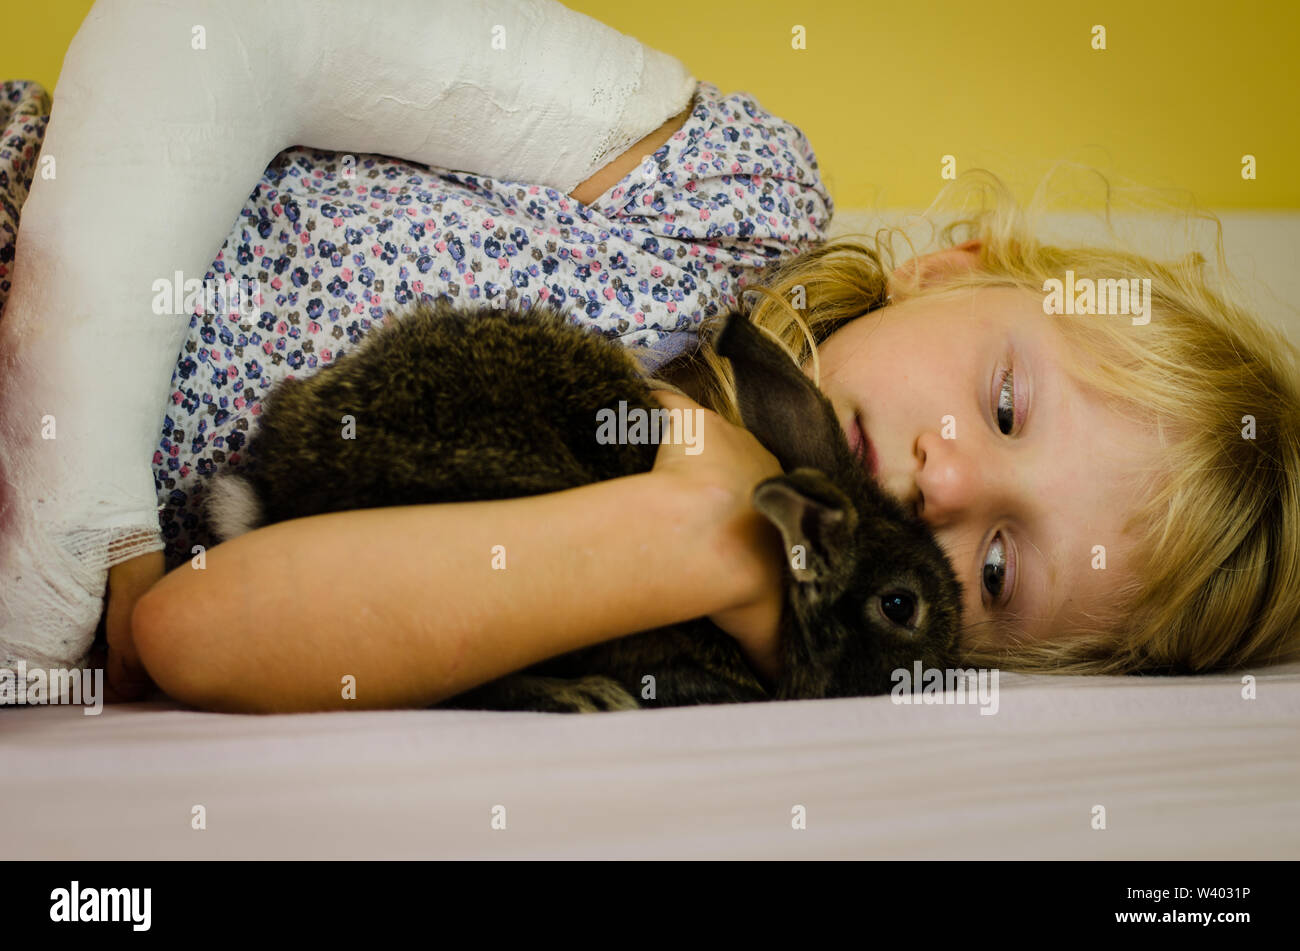 hurt blond girl with broken hand lying in bad and holding bunny rabbit pet Stock Photo